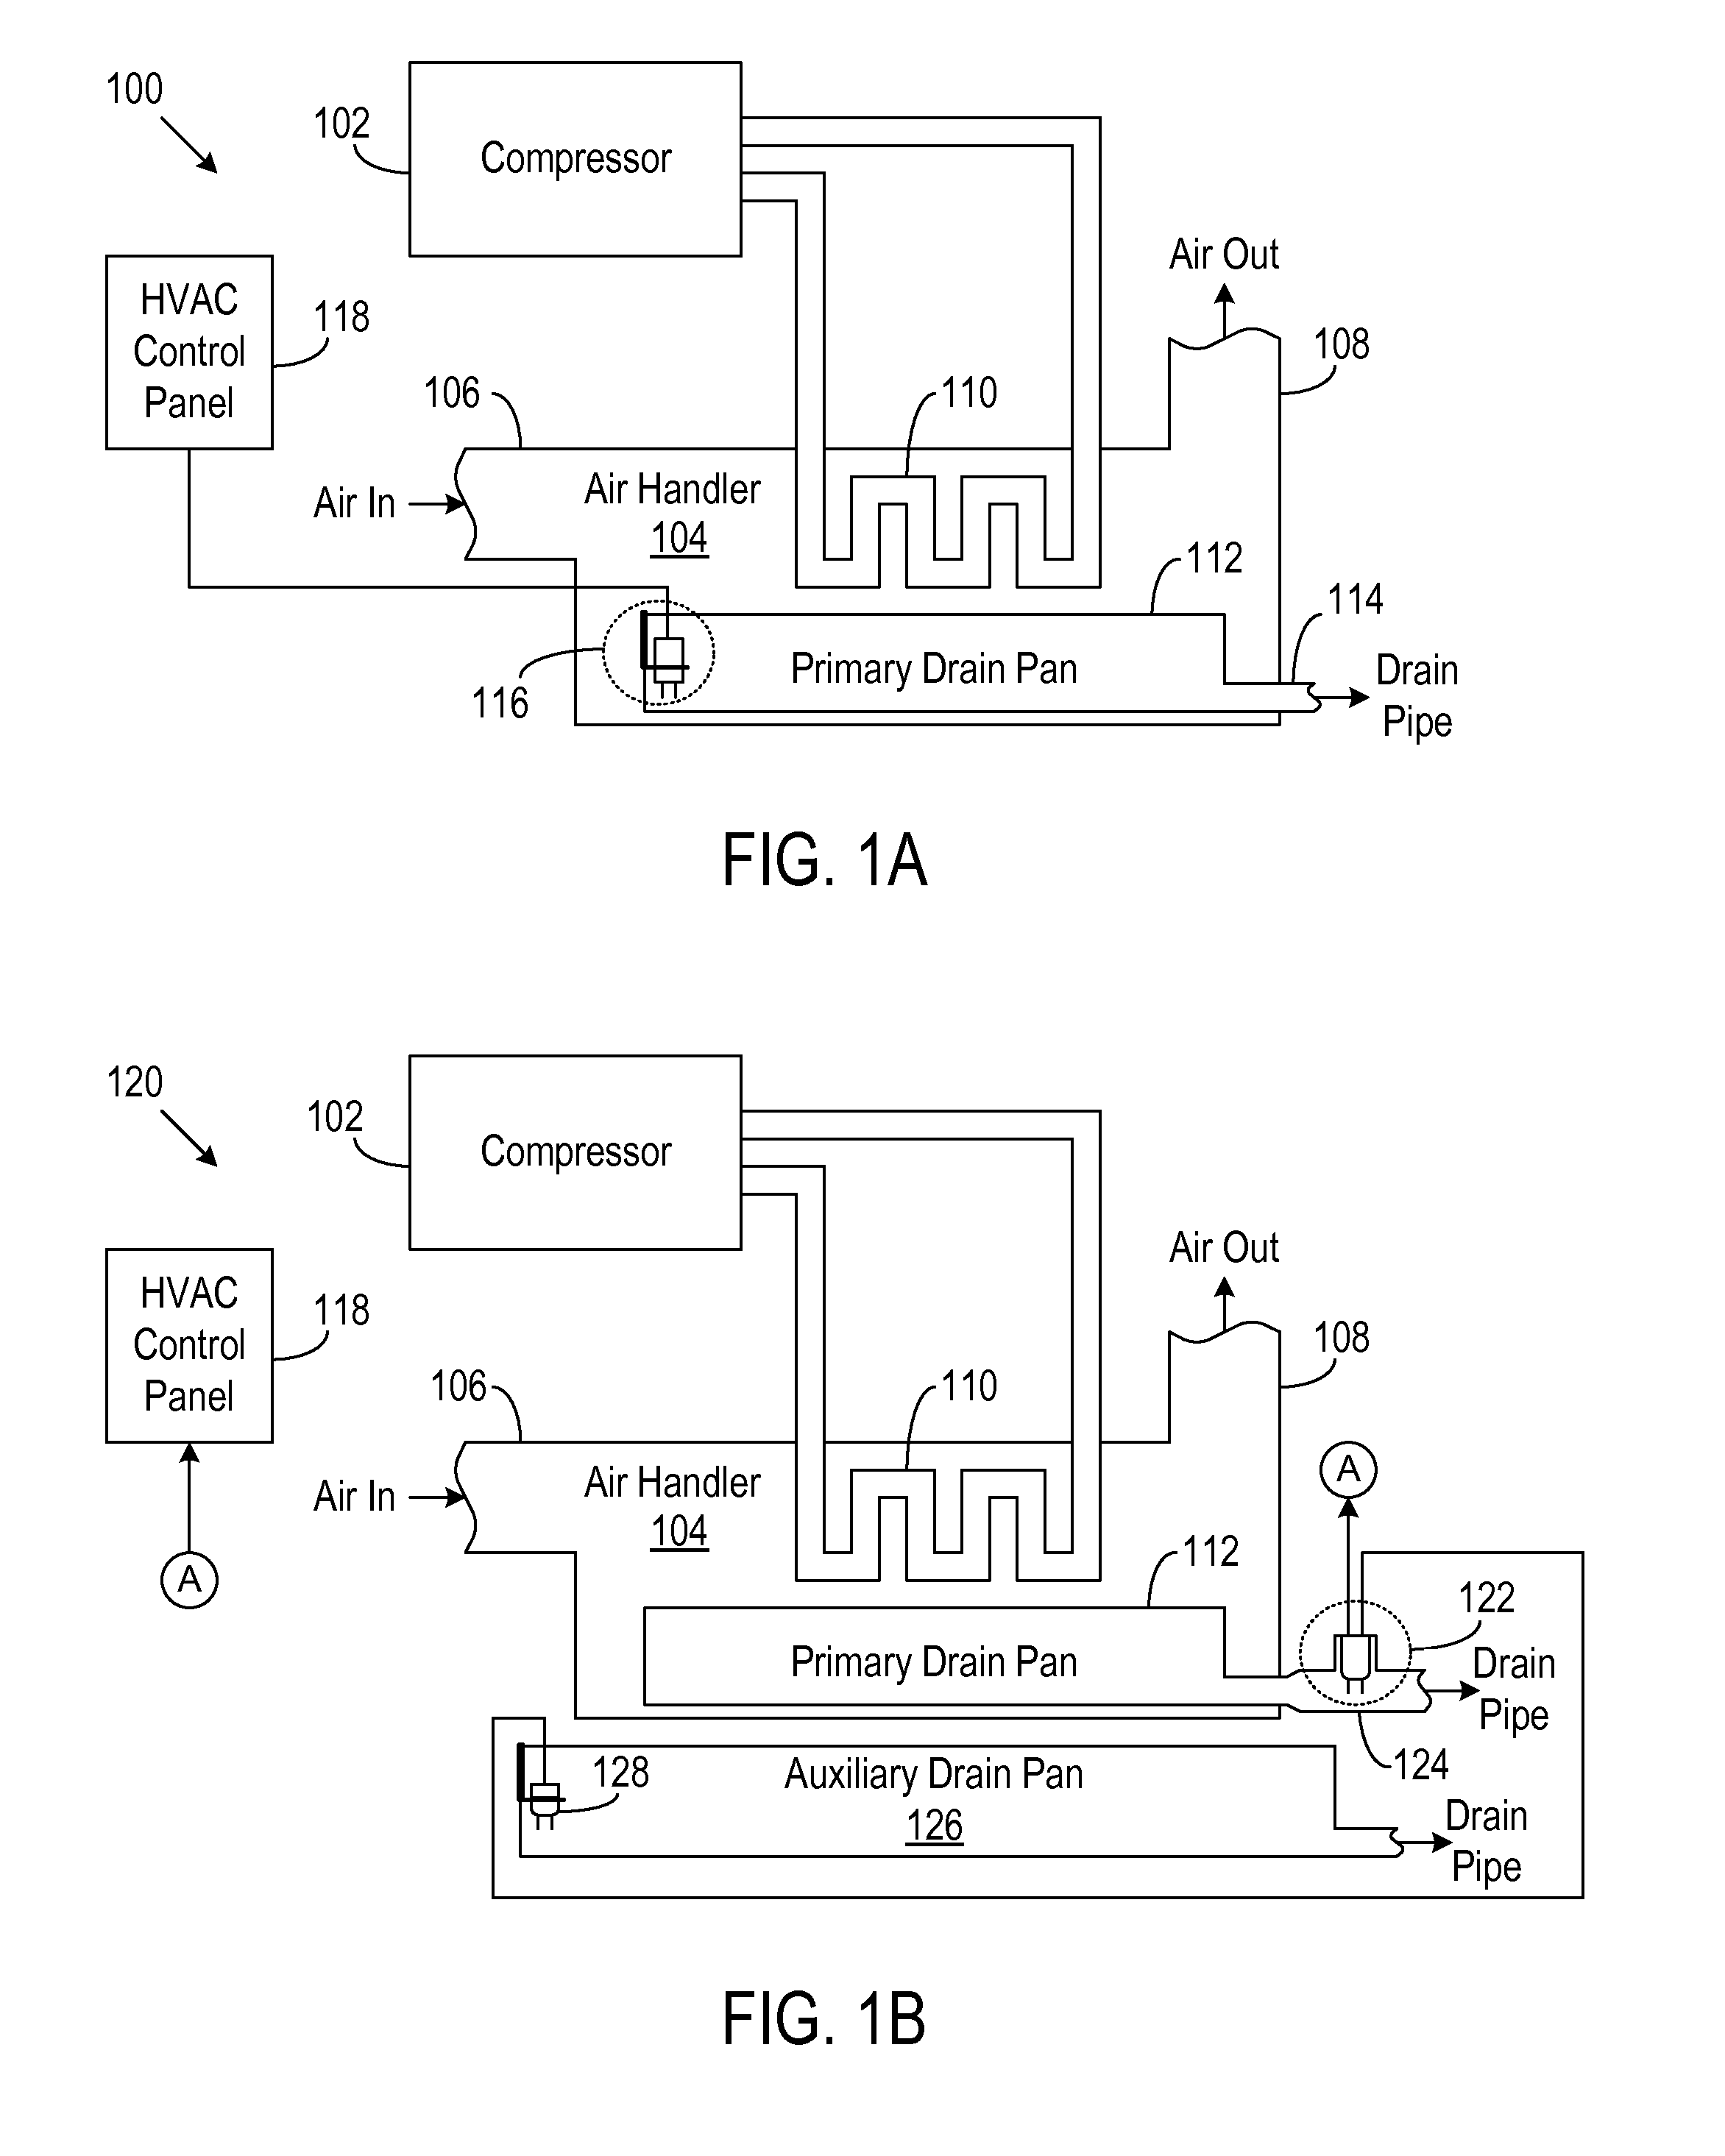 Electronic condensate overflow switch